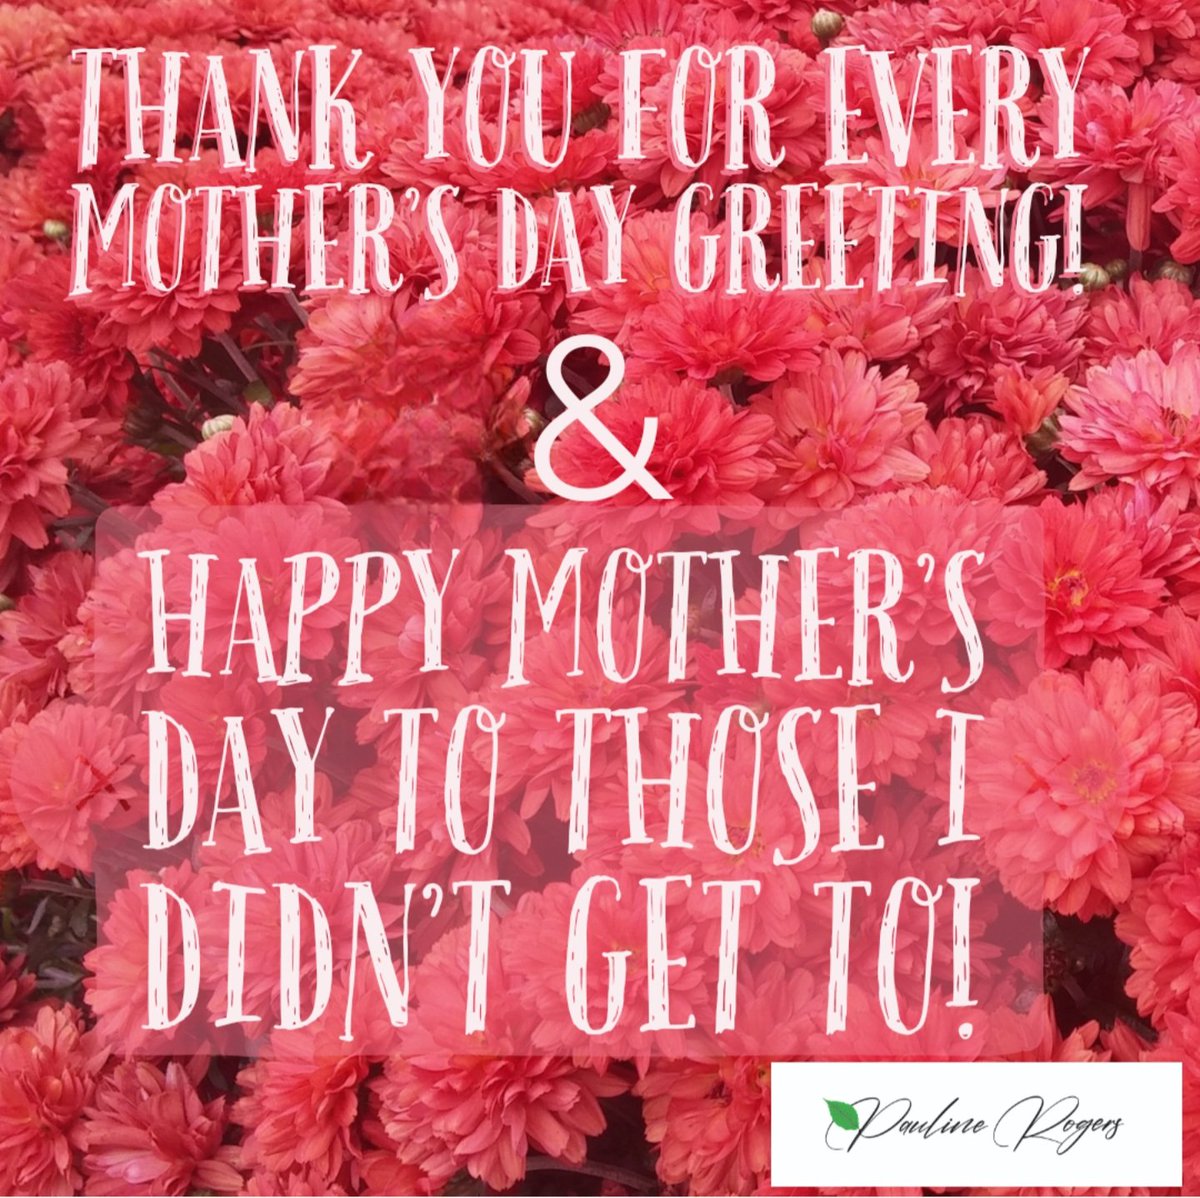 Thank you. I will respond to each one. Happy Mothers Day every day. #thankyou #appreciation #gratitude #PaulineRogersMS #Solutionist #iamaningredient #JusticeGeneral